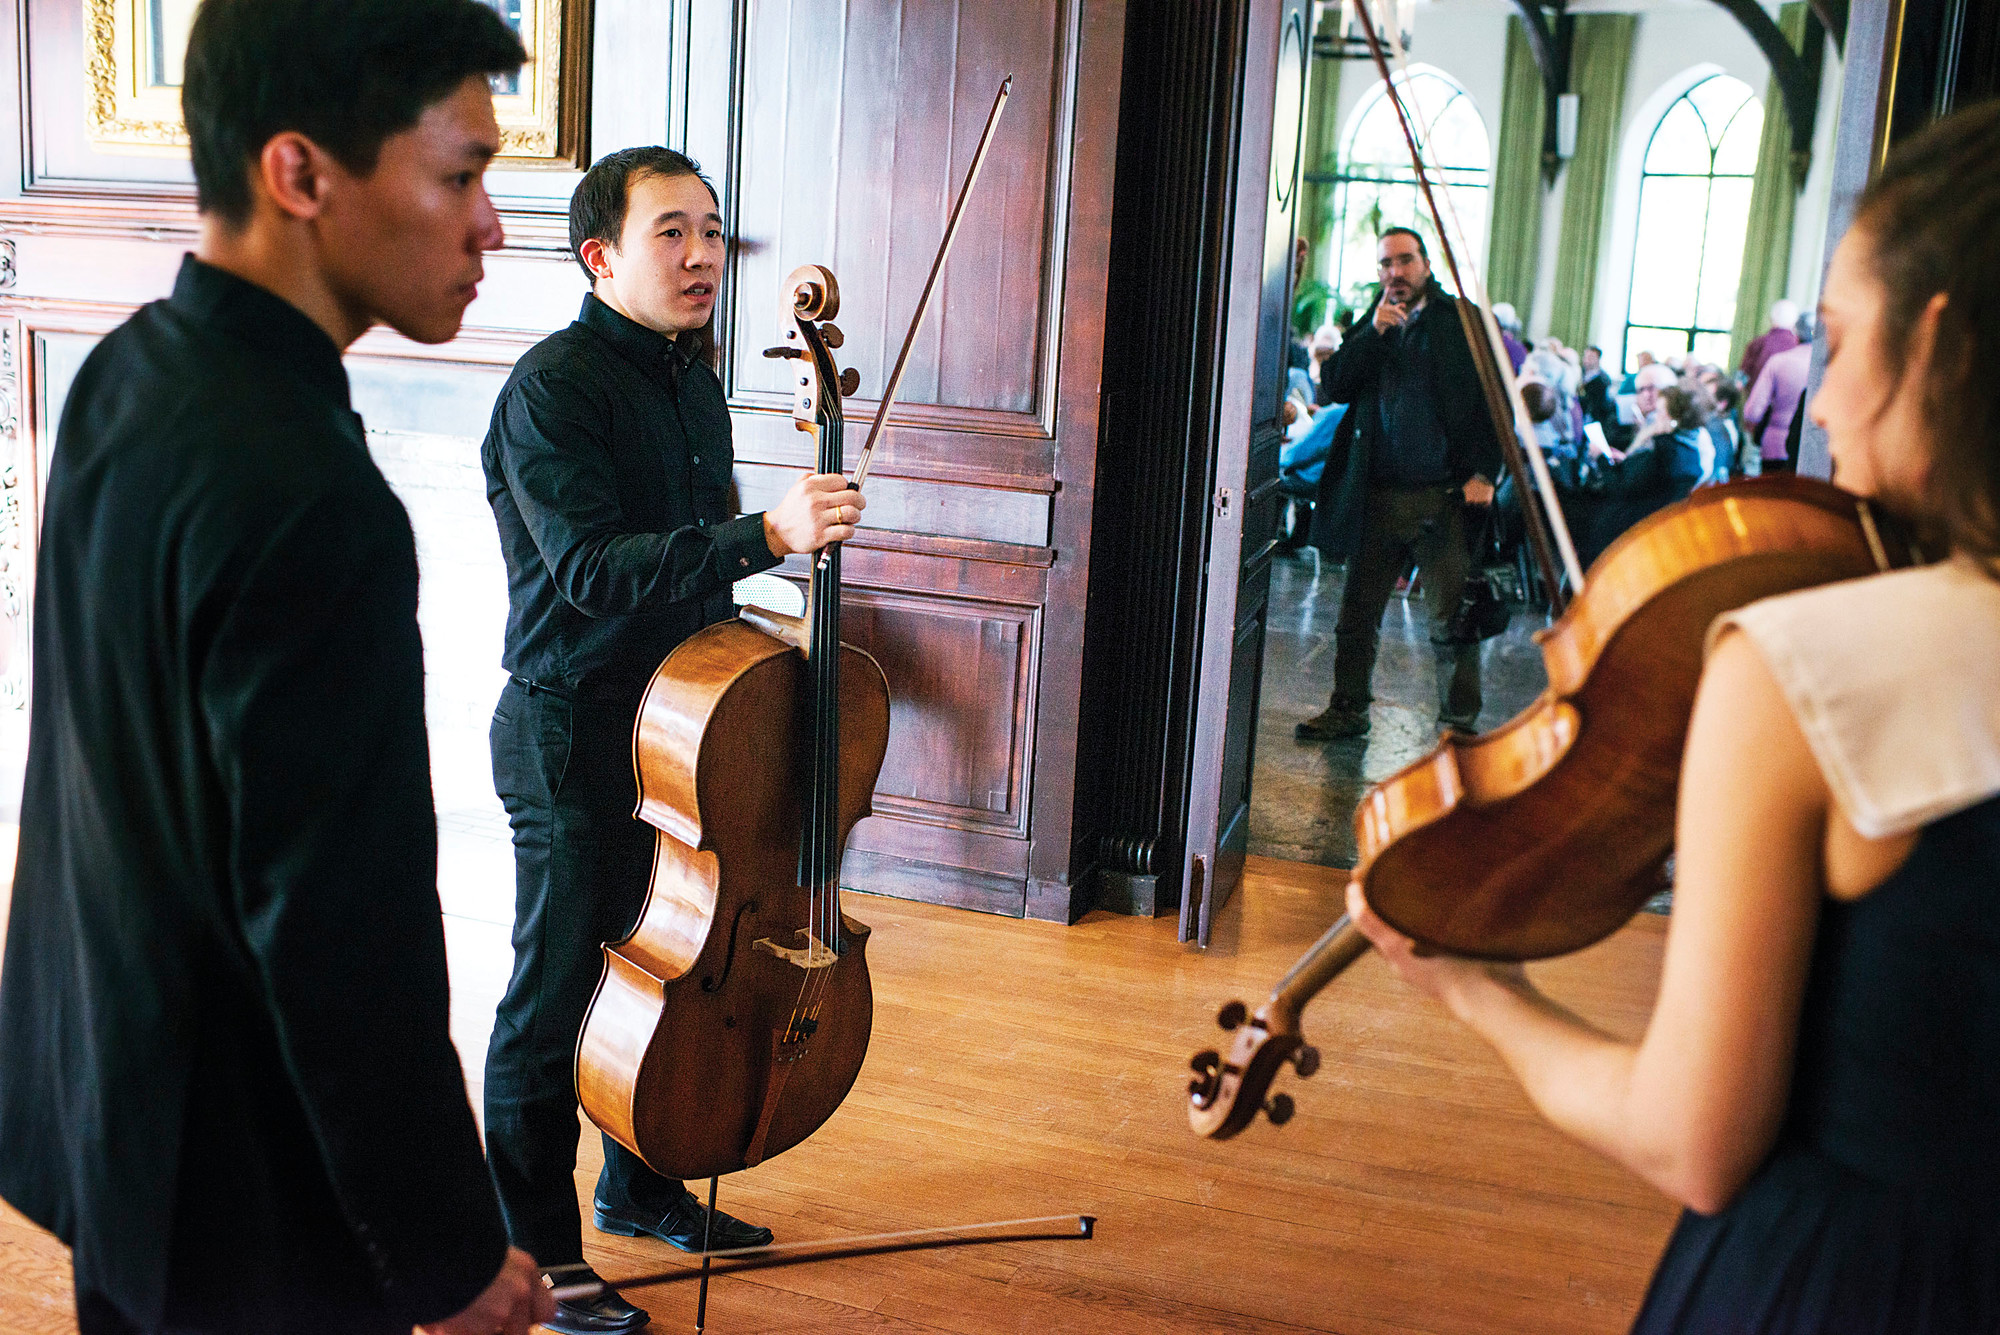 Violinist Daniel Chong, cellist Kee-Hyun Kim, and violist Jessica Bodner wait to enter the concert hall at the Wave HIll estate, before a classical performance by their group, the Parker Quartet, on Jan. 11, 2015.